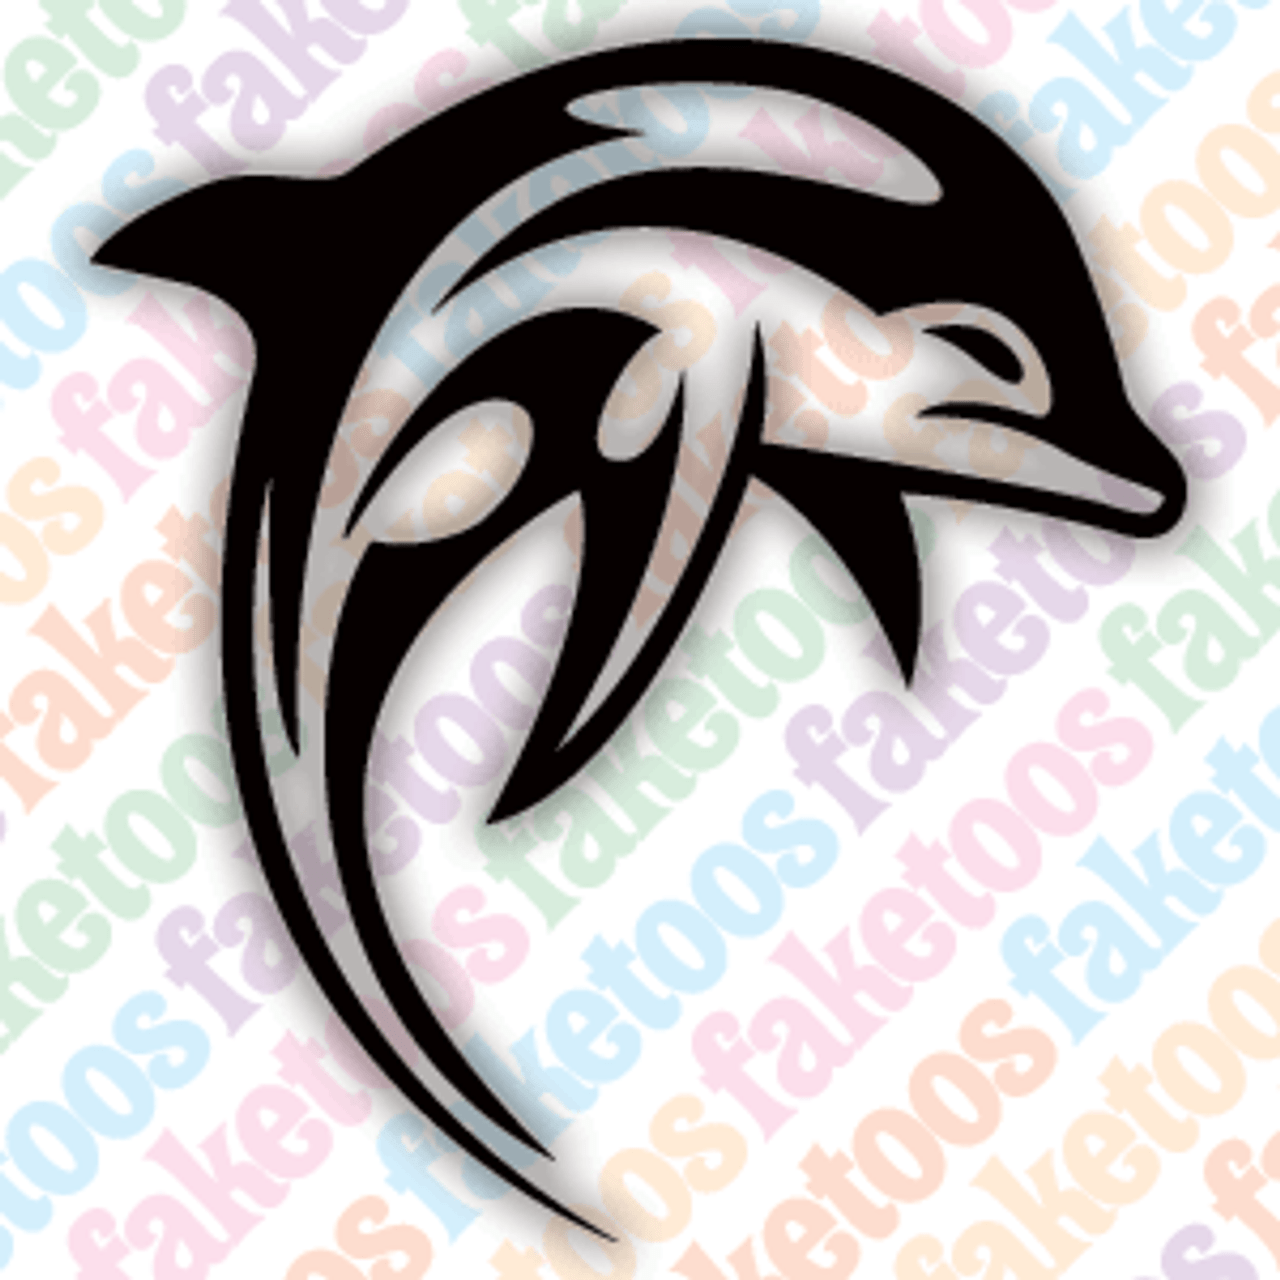 Dolphin temporary tattoo | Fake removable tattoos & temp tatto designs |  Tatoo decal party stickers ideas. Last 2-5 days & go on with water.  Removeable party sticker decals - Stock temp